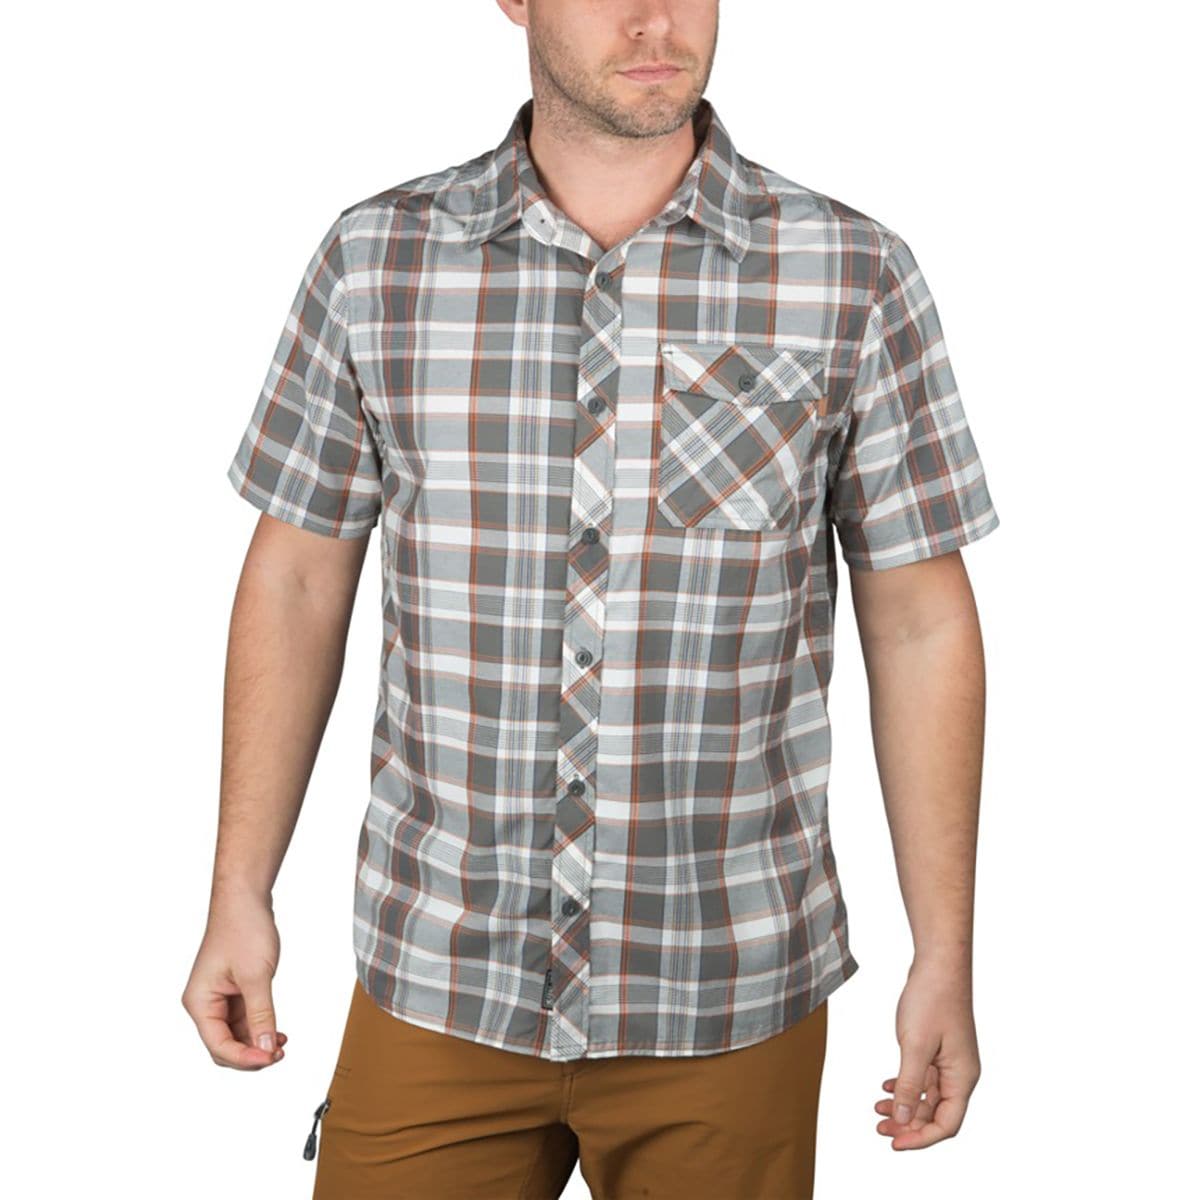 Outdoor Research Pale Ale Shirt - Men's - Clothing